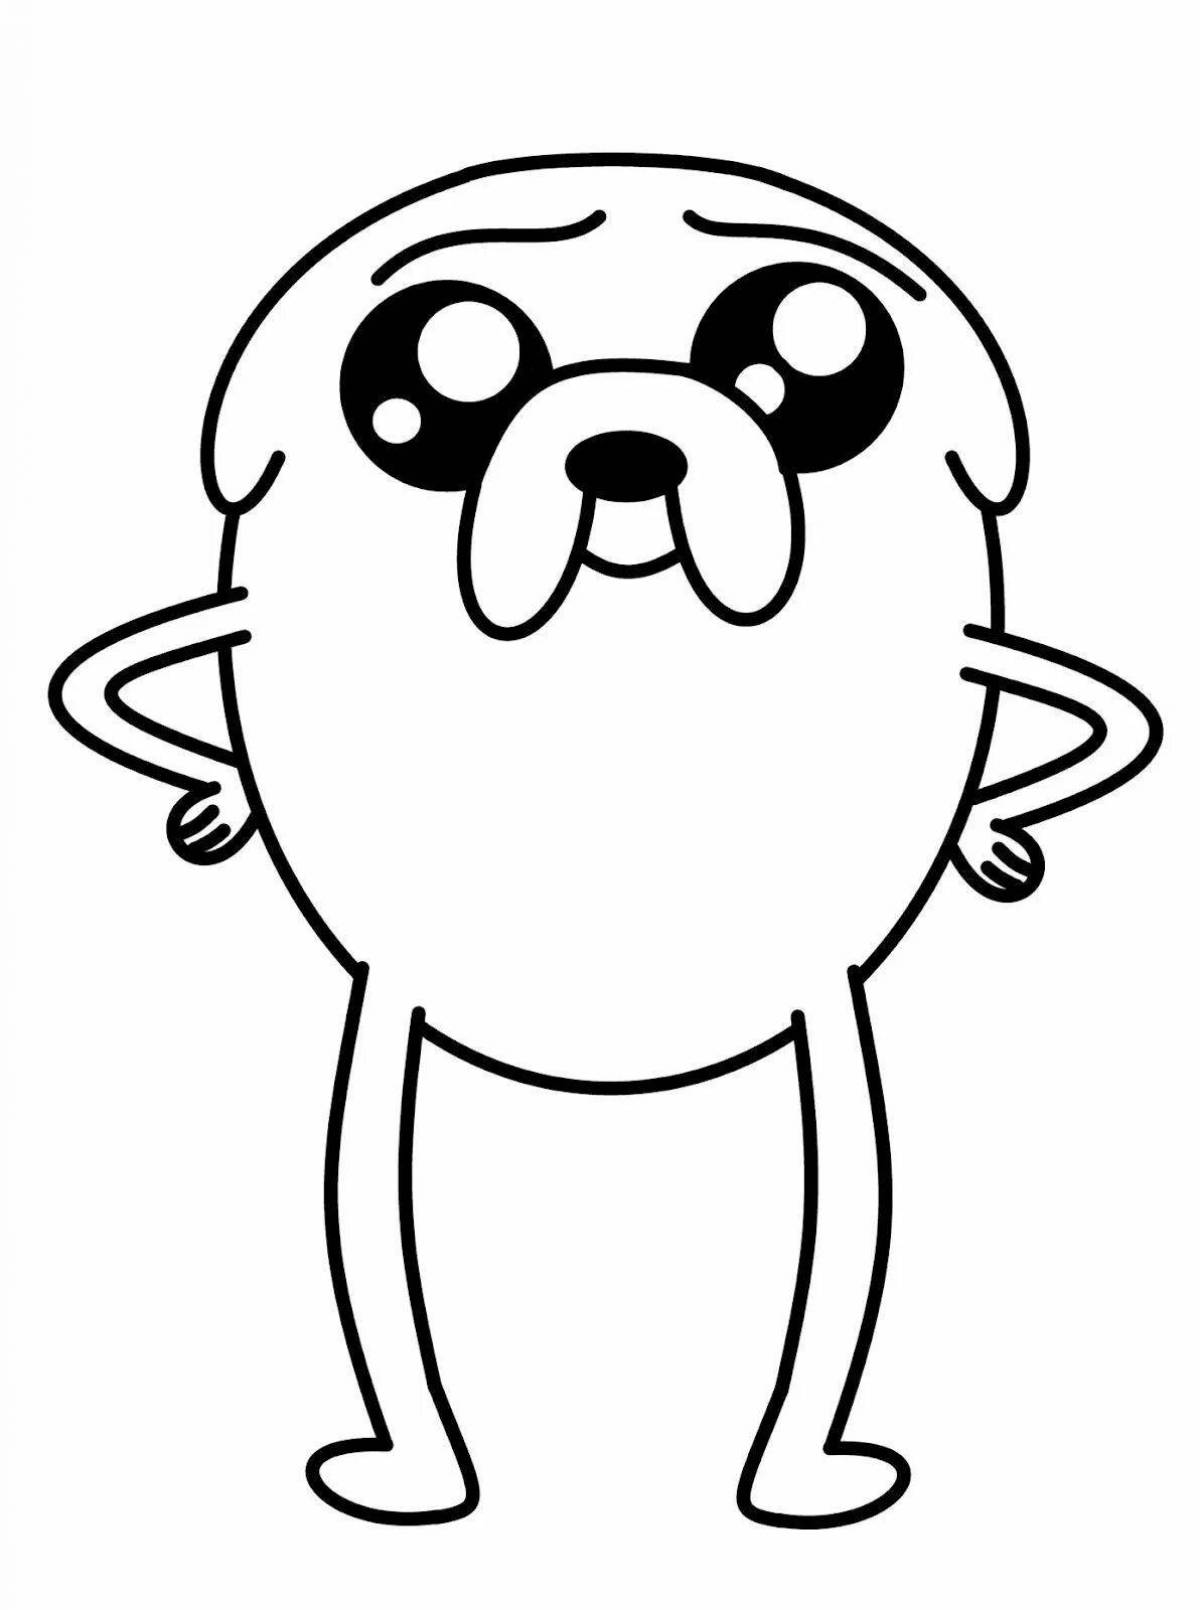 Jake adventure time coloring pages